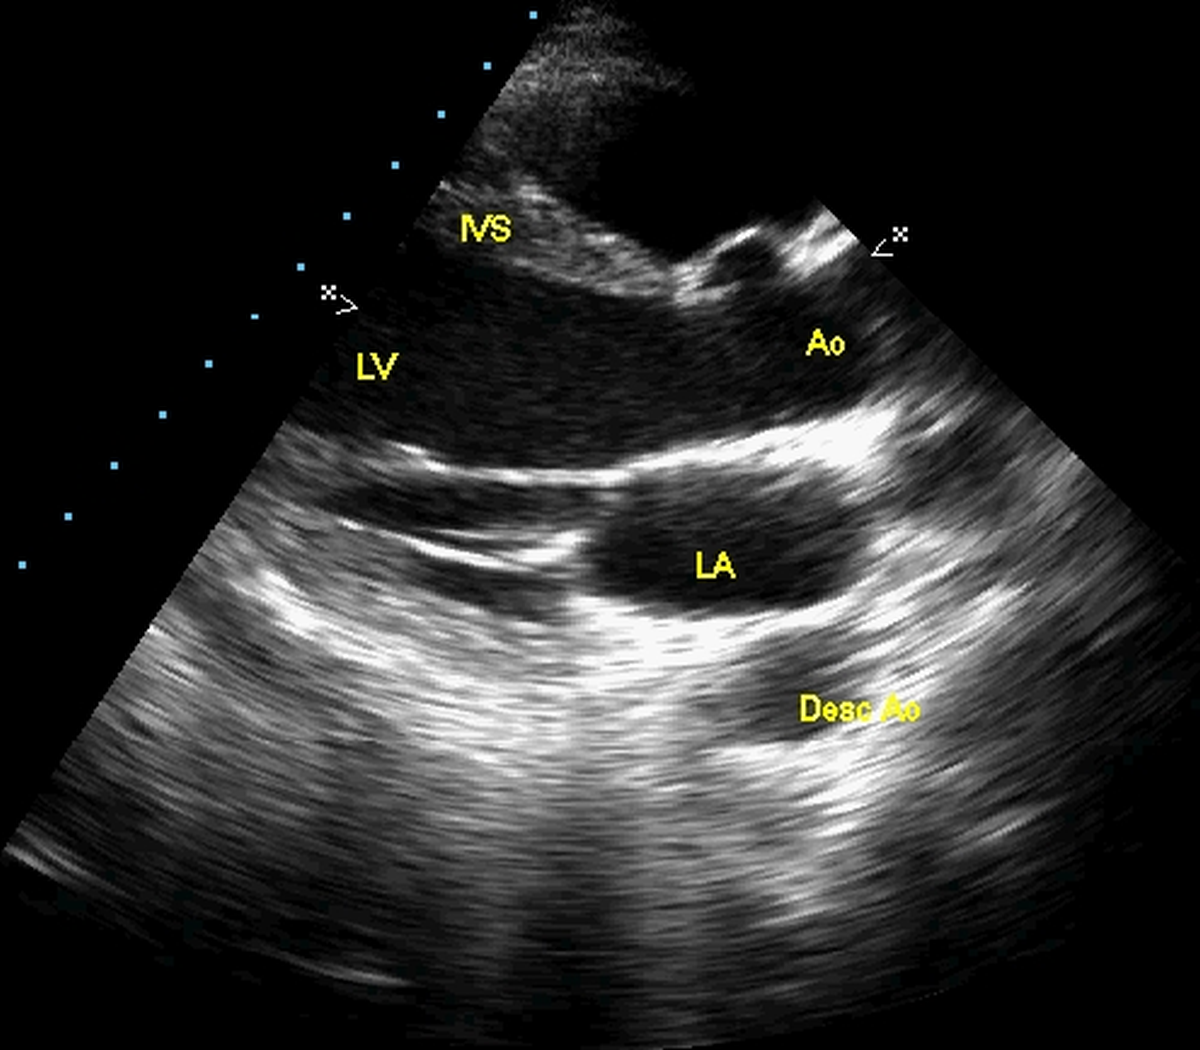 Echocardiogram in PLAX view with video